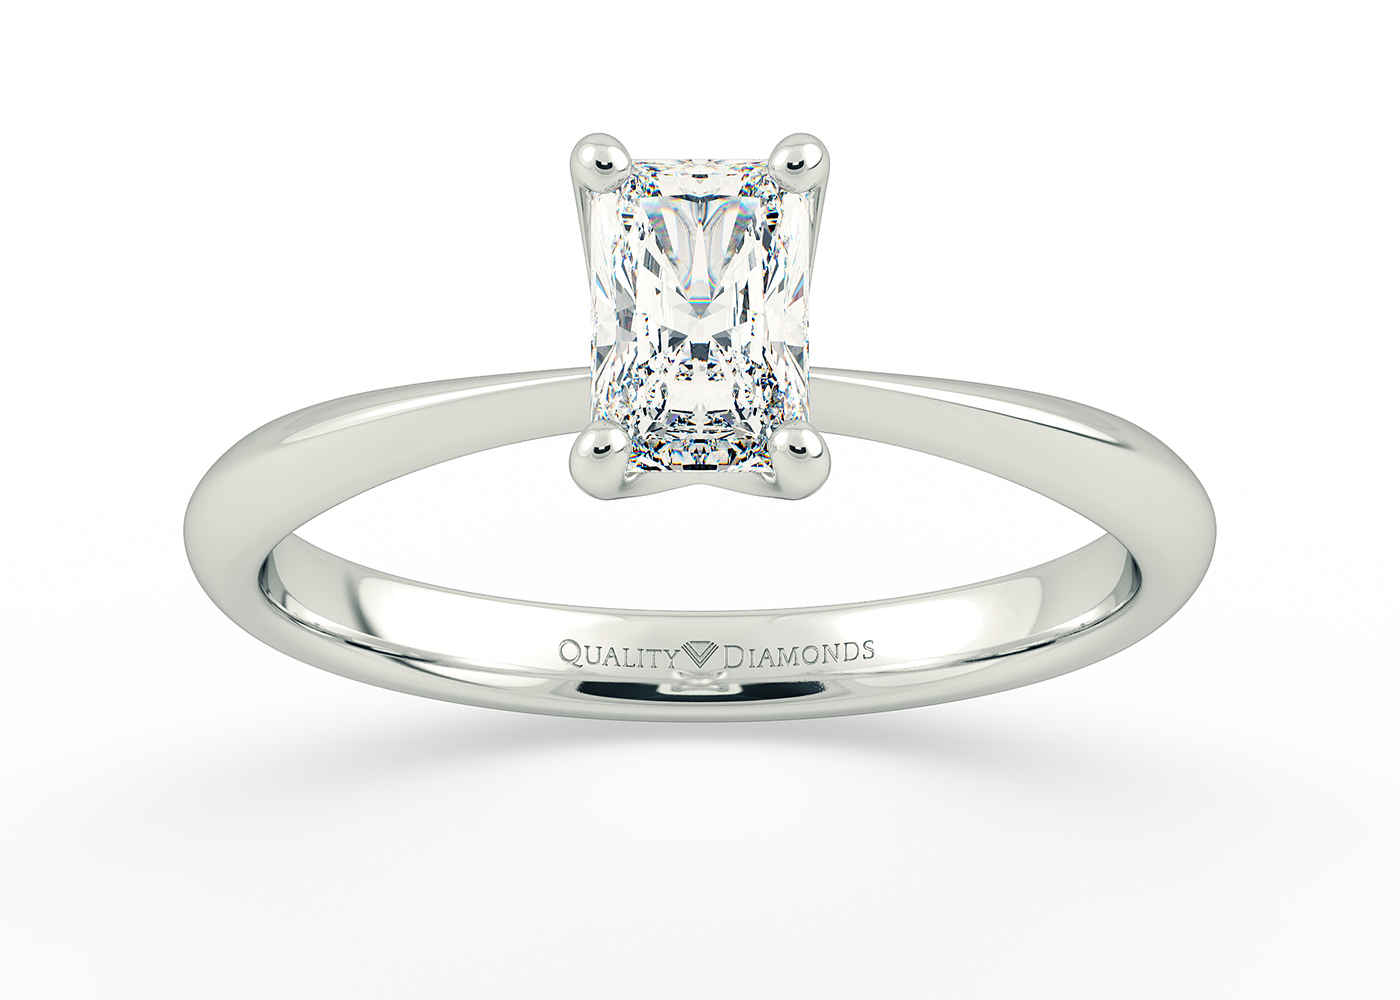 Half Carat Radiant Solitaire Diamond Engagement Ring in 9K White Gold